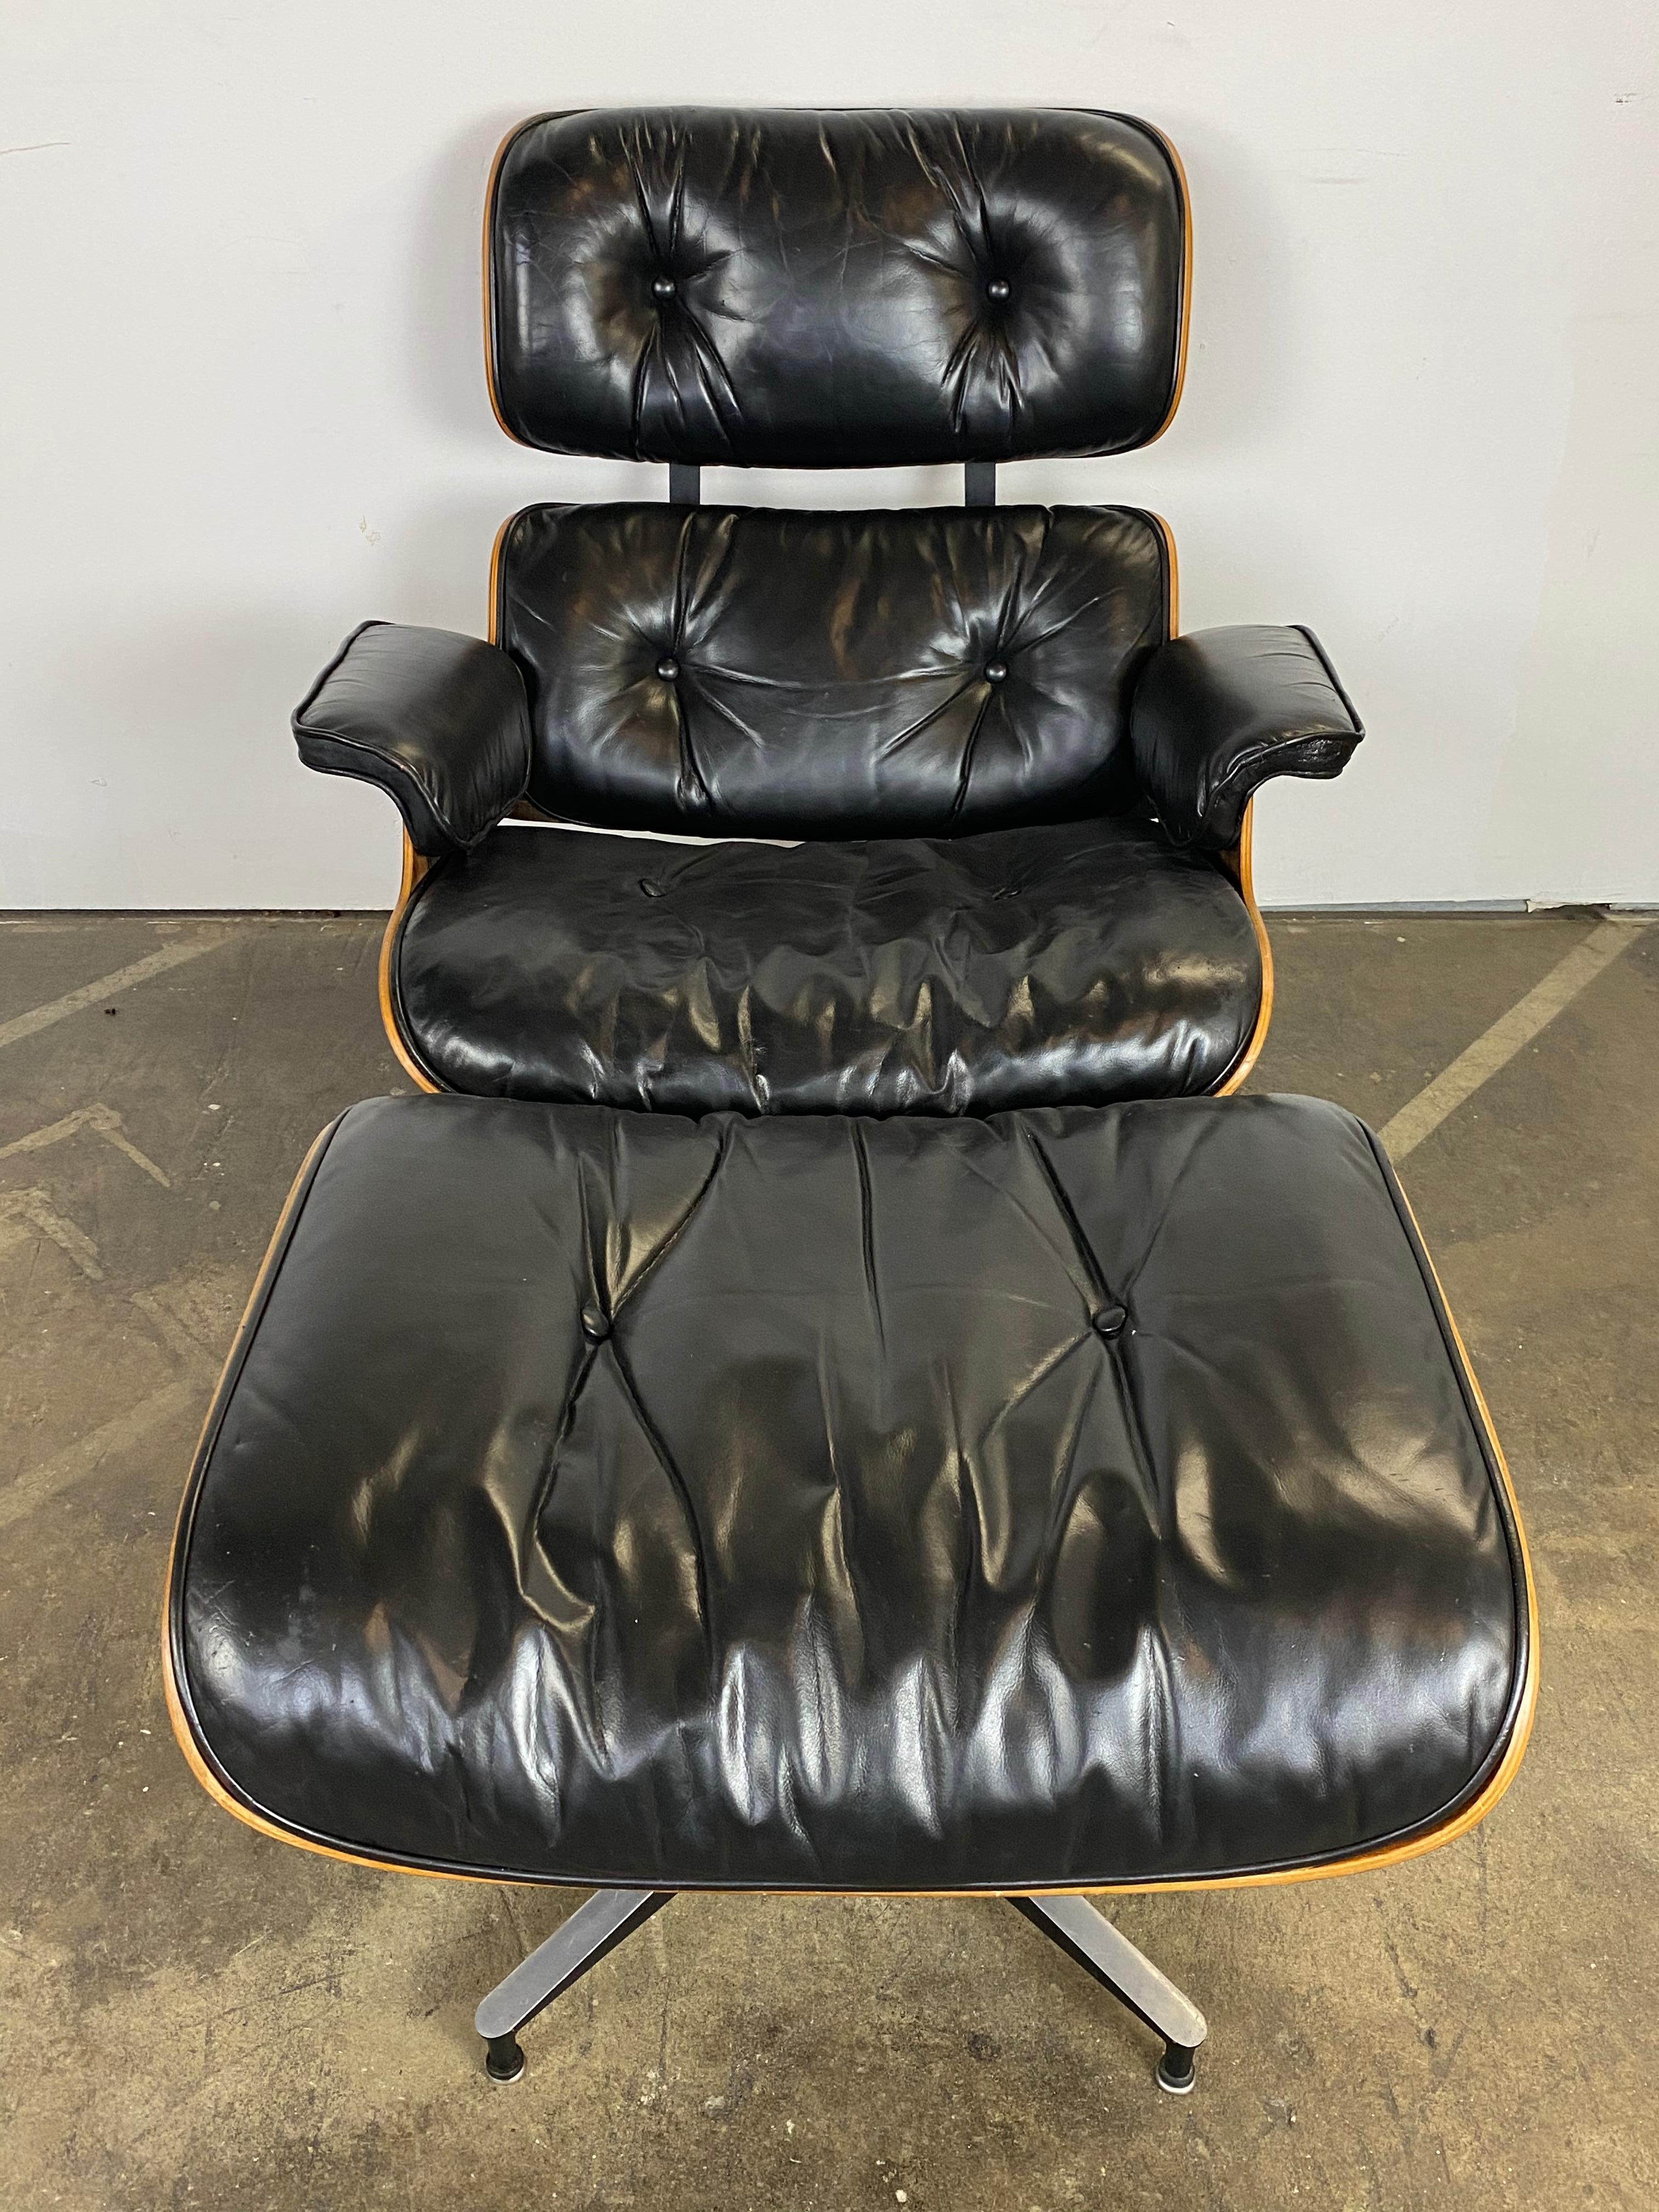 Handsome and elegant example of the modernist design Classic. This Eames lounge chair features spectacular Brazilian wood shells and black leather. The wood has been recently oiled (per Herman Miller recommendation) and displays its beautiful color